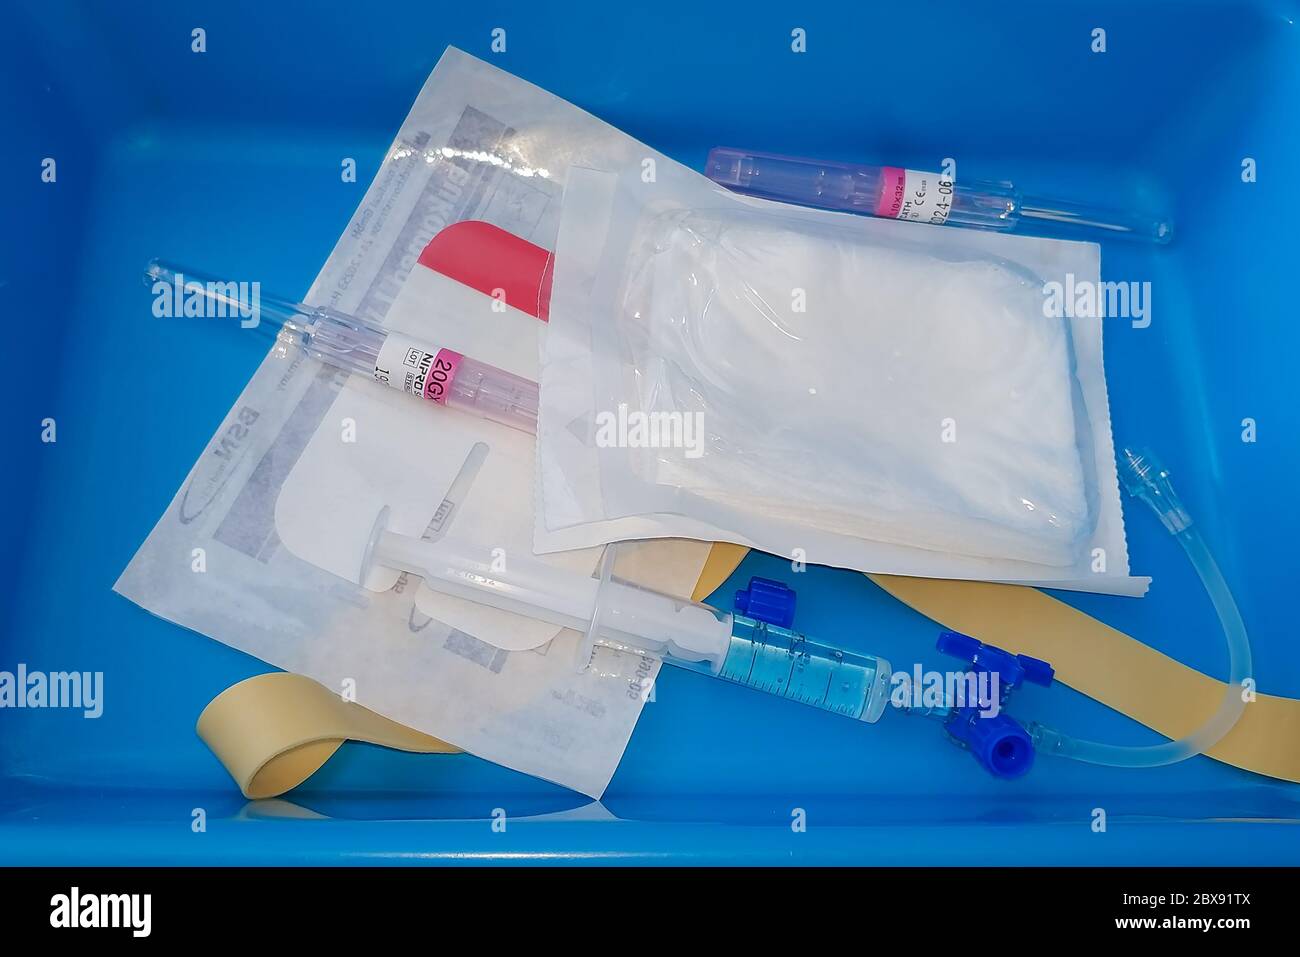 Huelva, Spain - June 6, 2020: A tray of intravenous cannula ready to be used with a patient Stock Photo